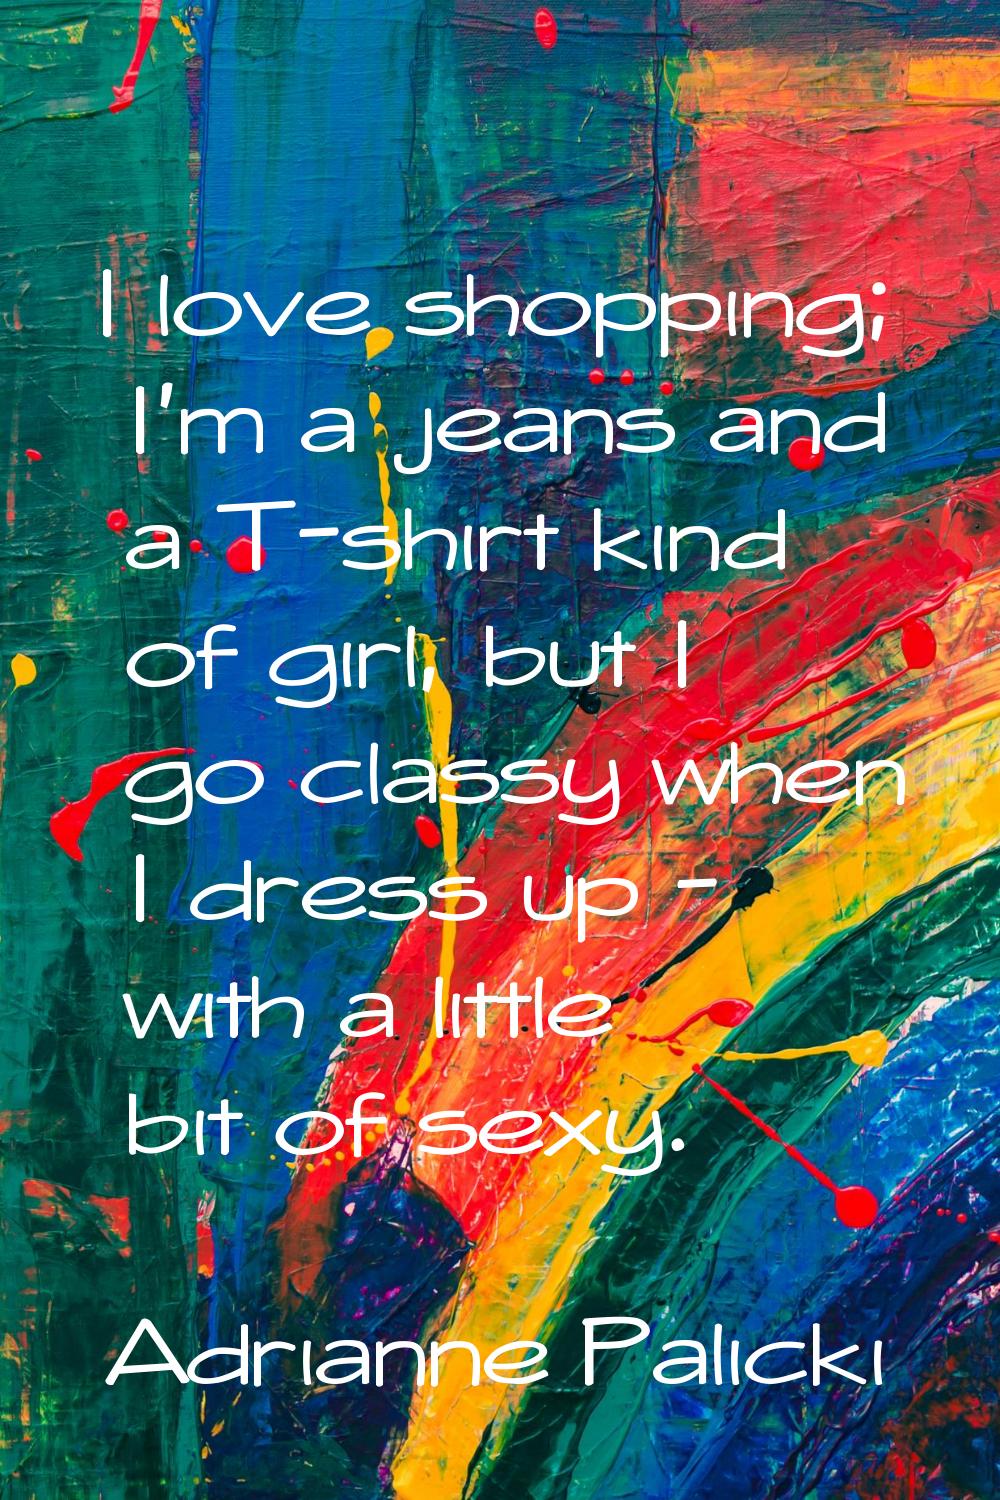 I love shopping; I'm a jeans and a T-shirt kind of girl, but I go classy when I dress up - with a l